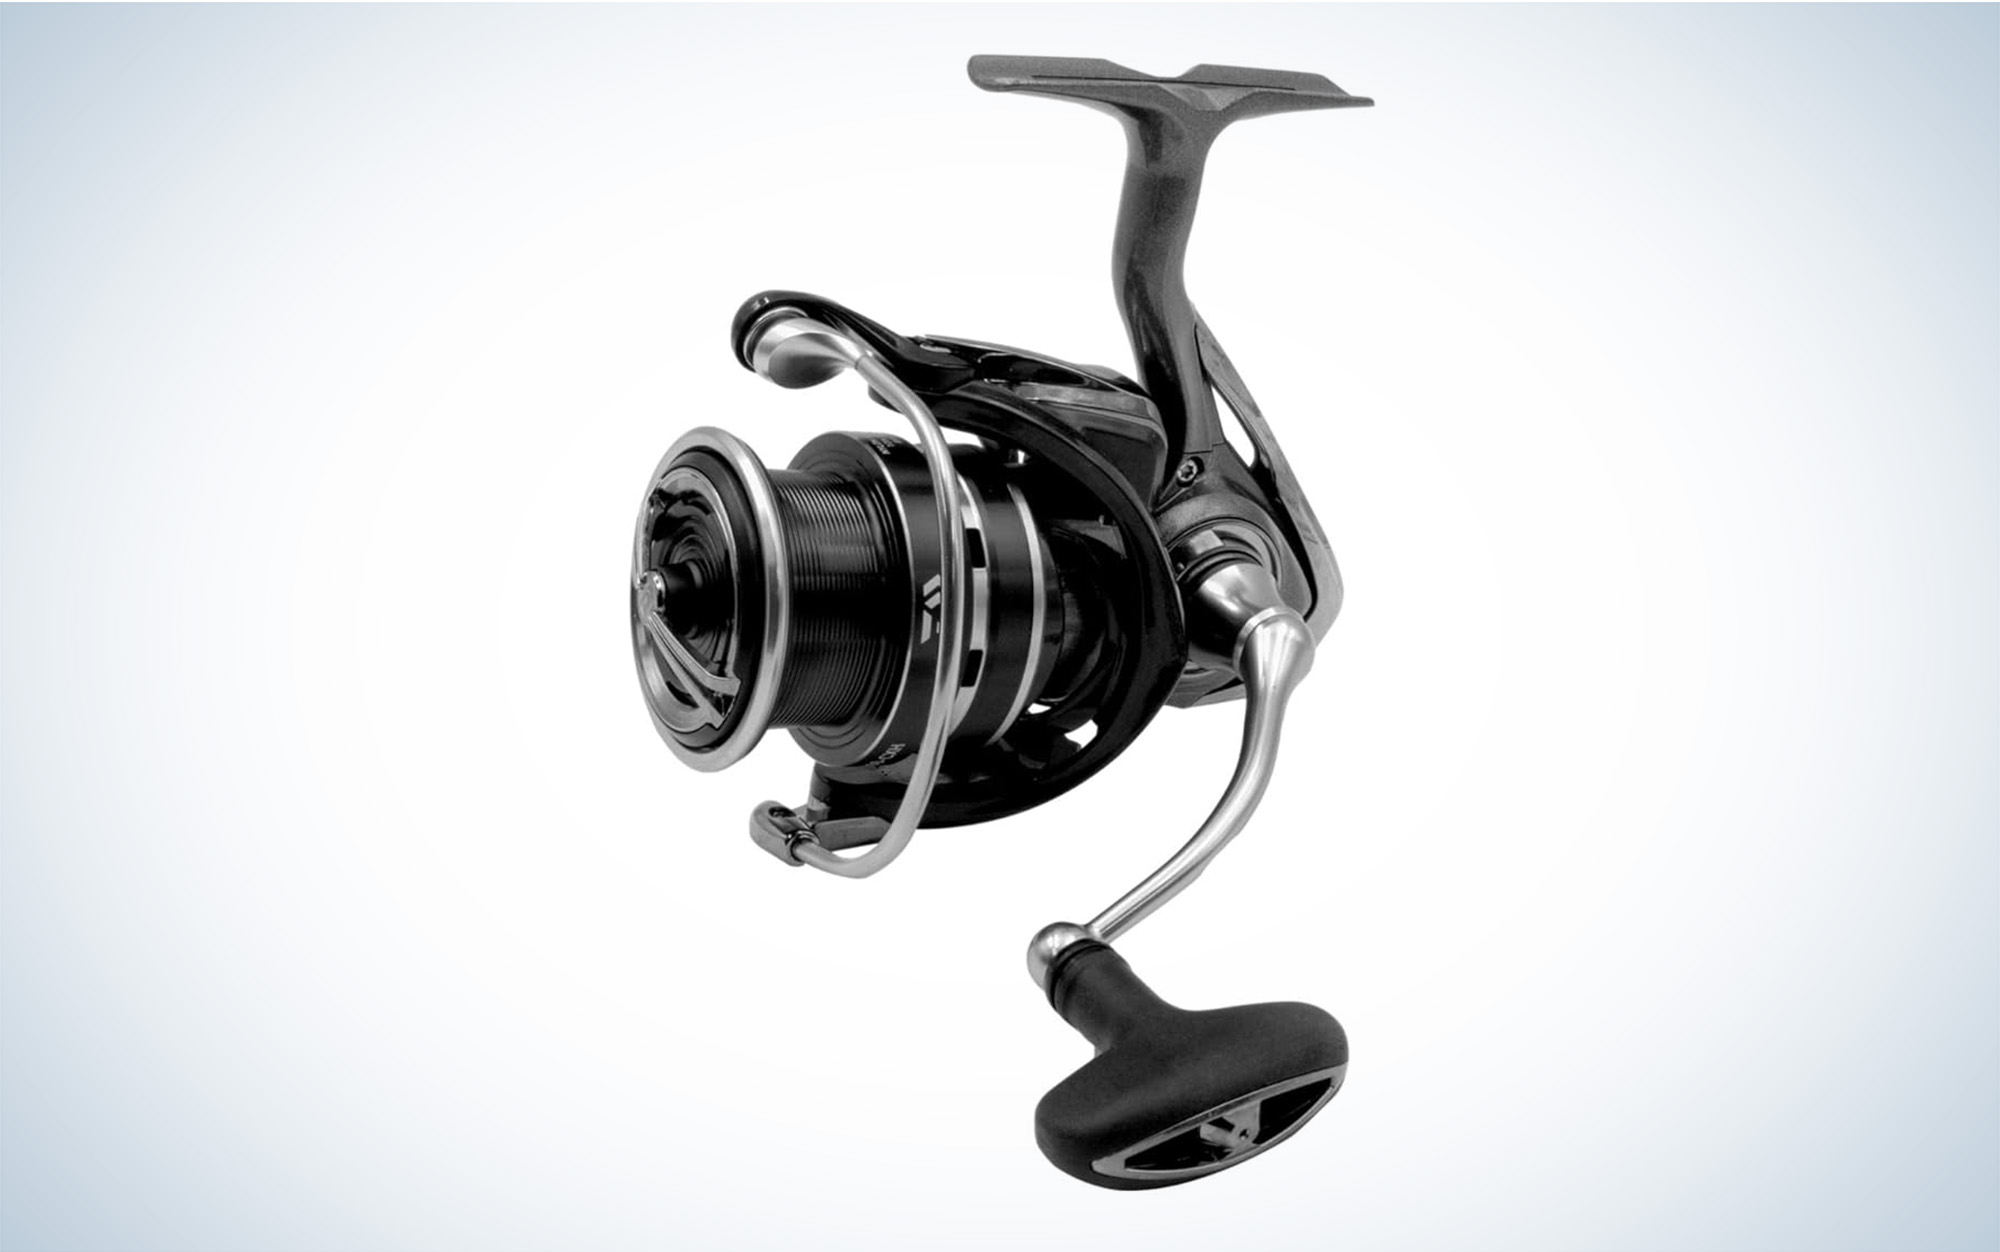 Buying Guide: Picking the Best Spinning Reel